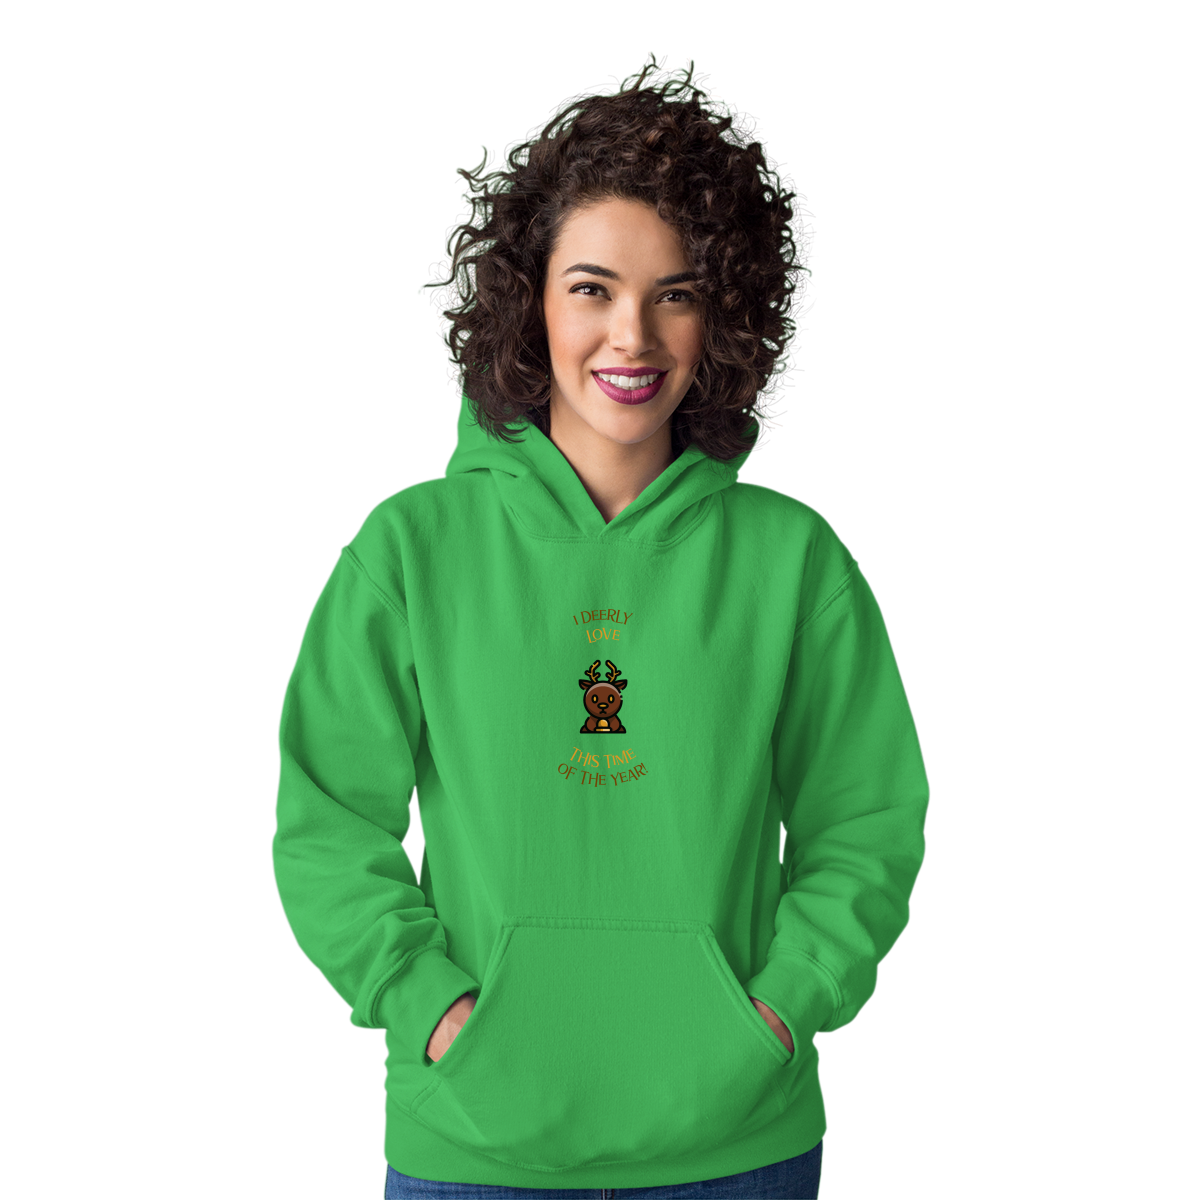 I Deerly Love This Time of the Year! Unisex Hoodie | Green